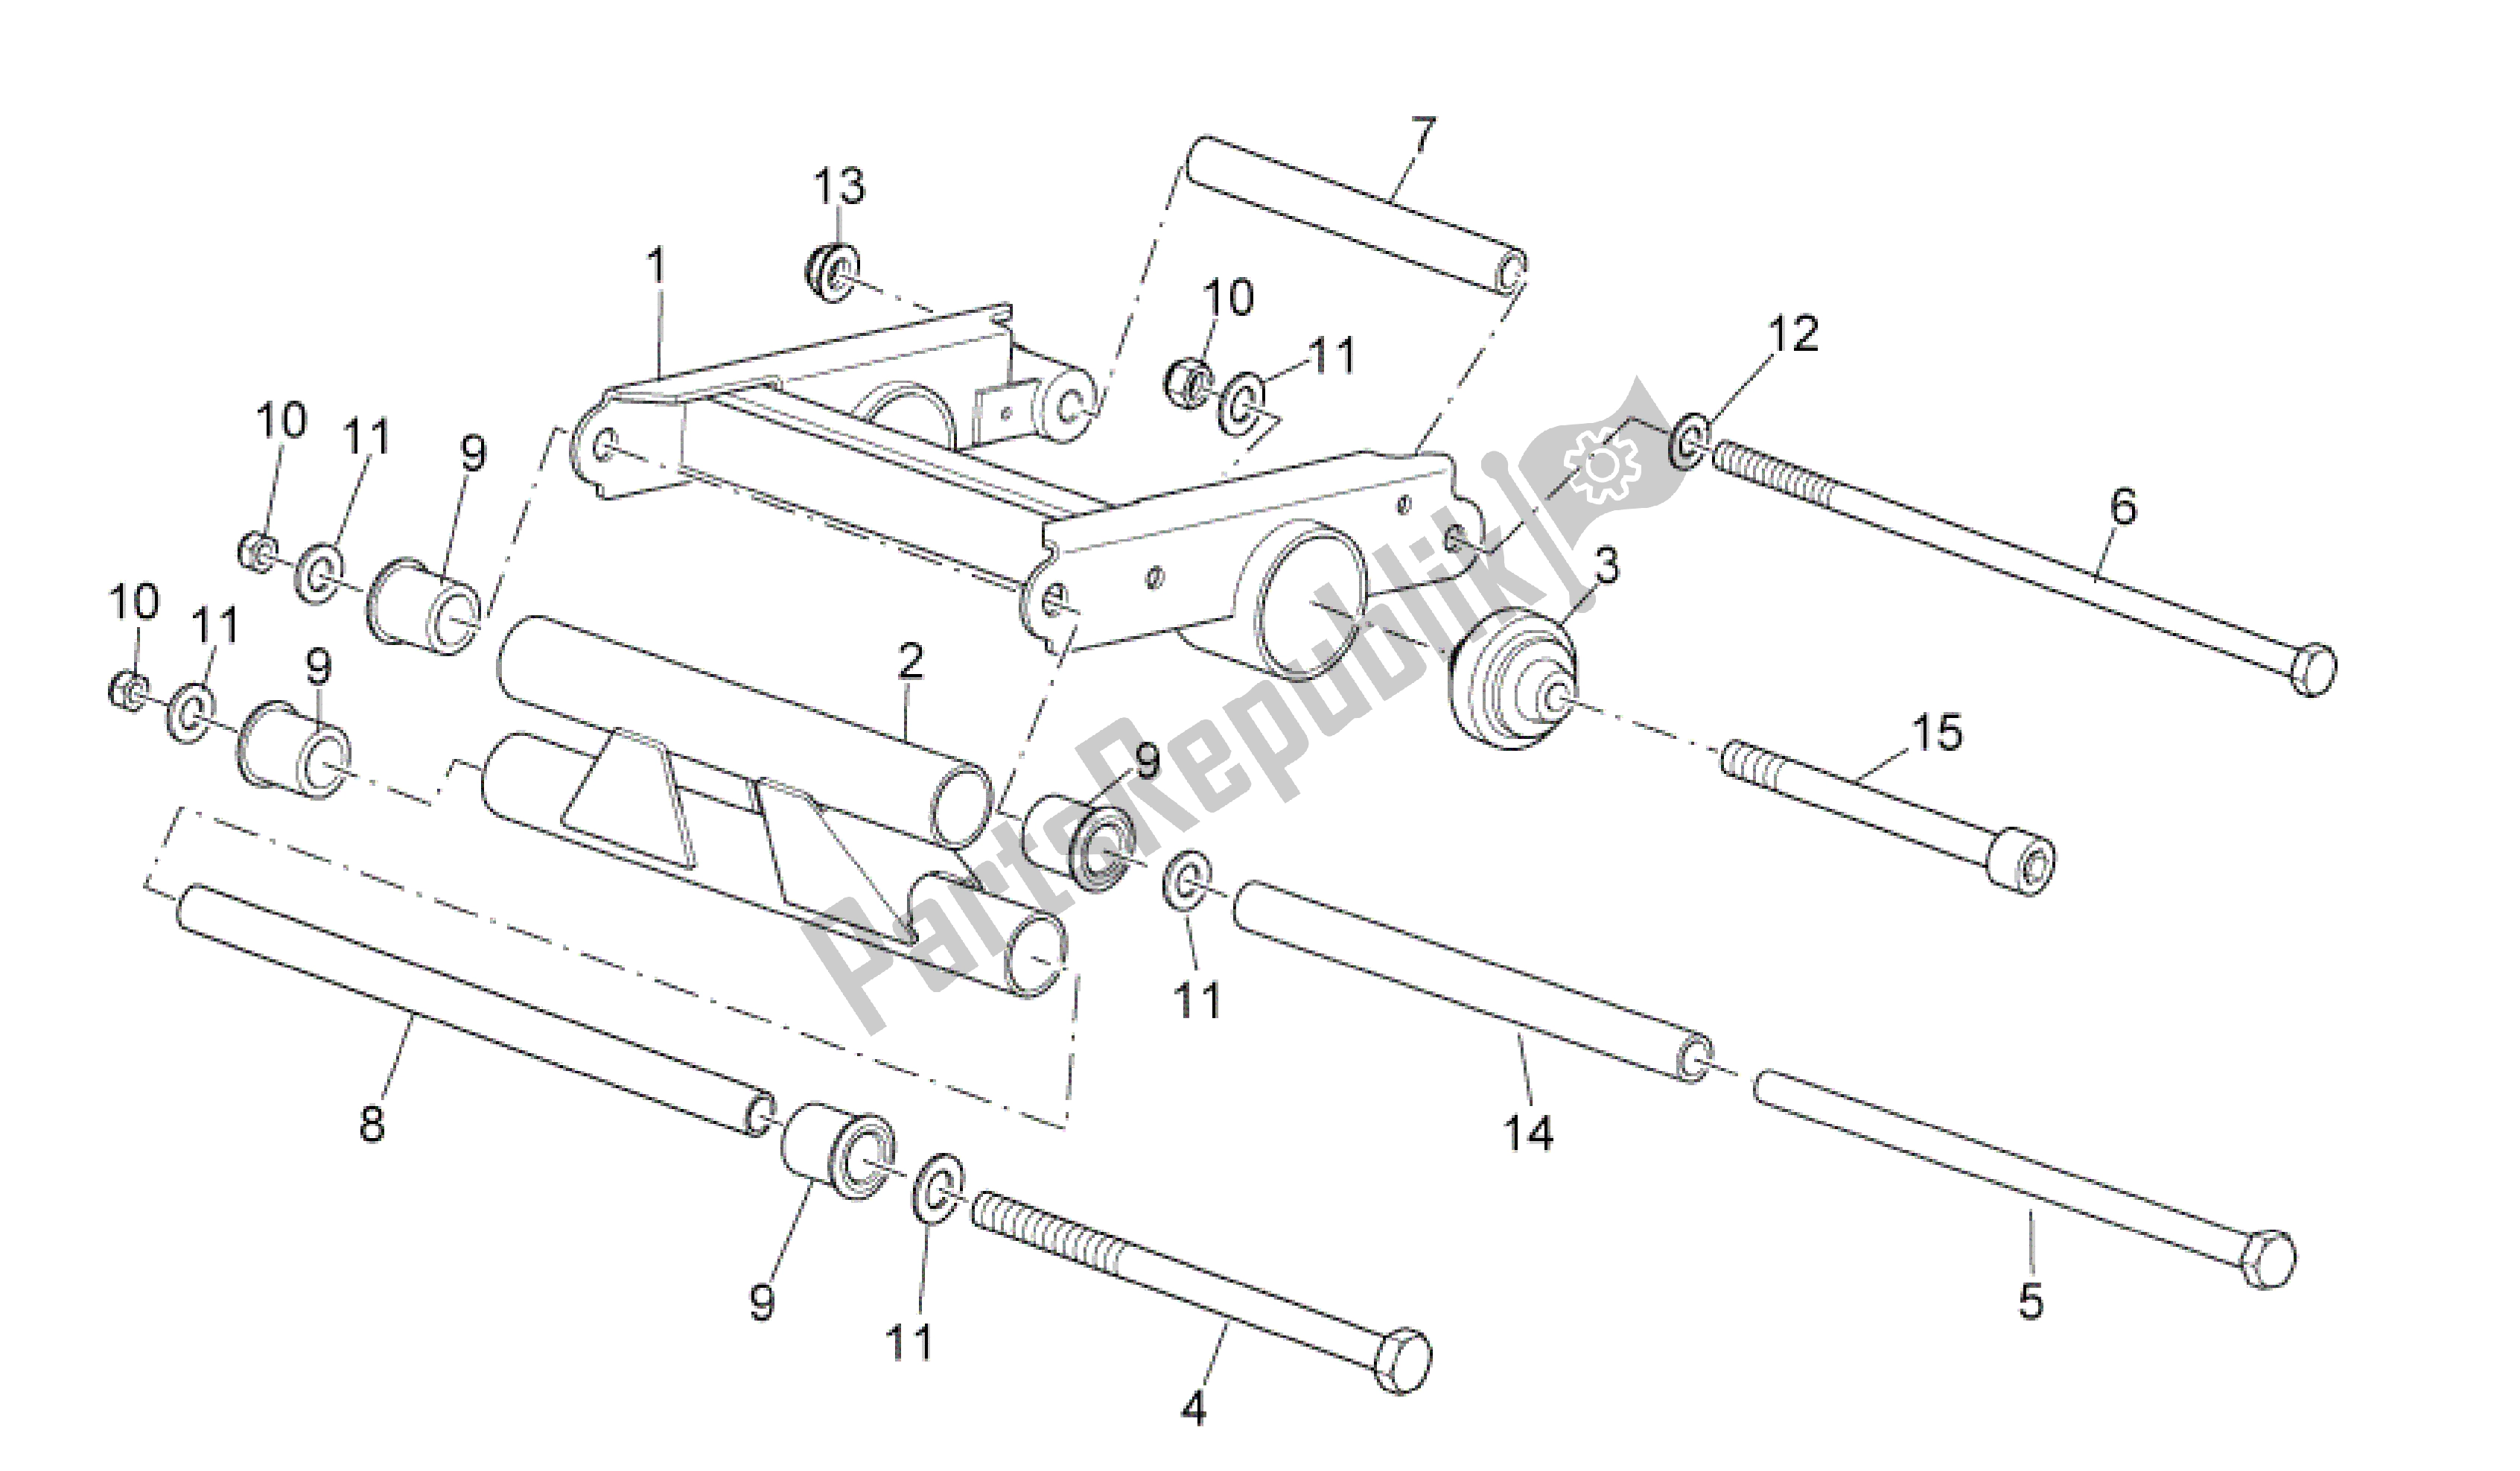 All parts for the Connecting Rod of the Aprilia Sport City 250 2008 - 2010